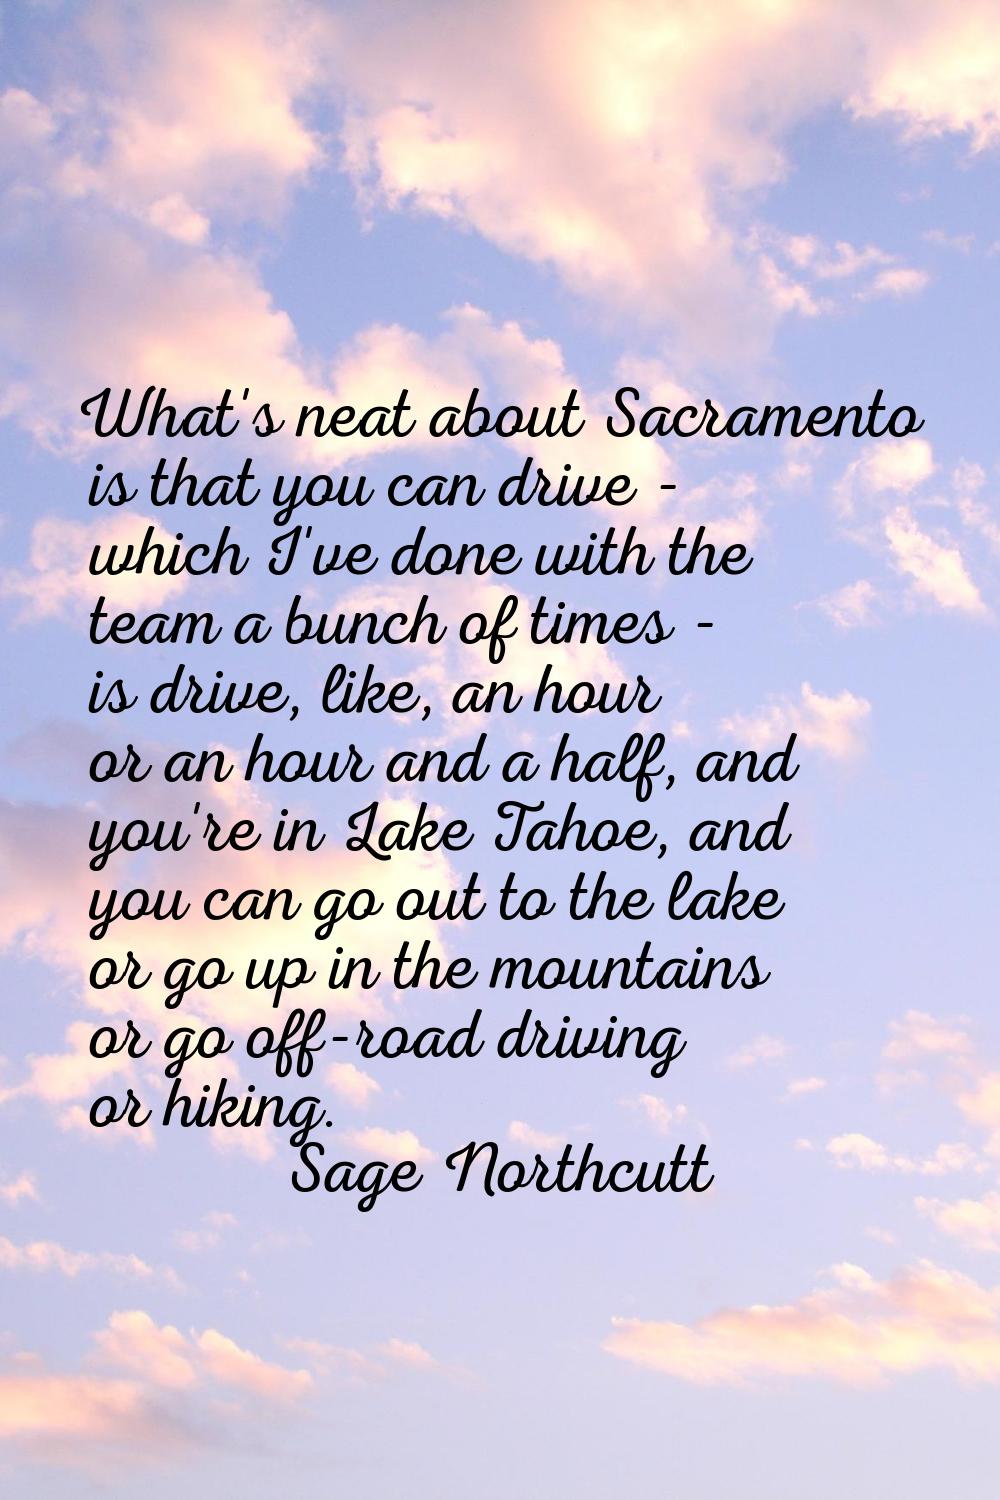 What's neat about Sacramento is that you can drive - which I've done with the team a bunch of times